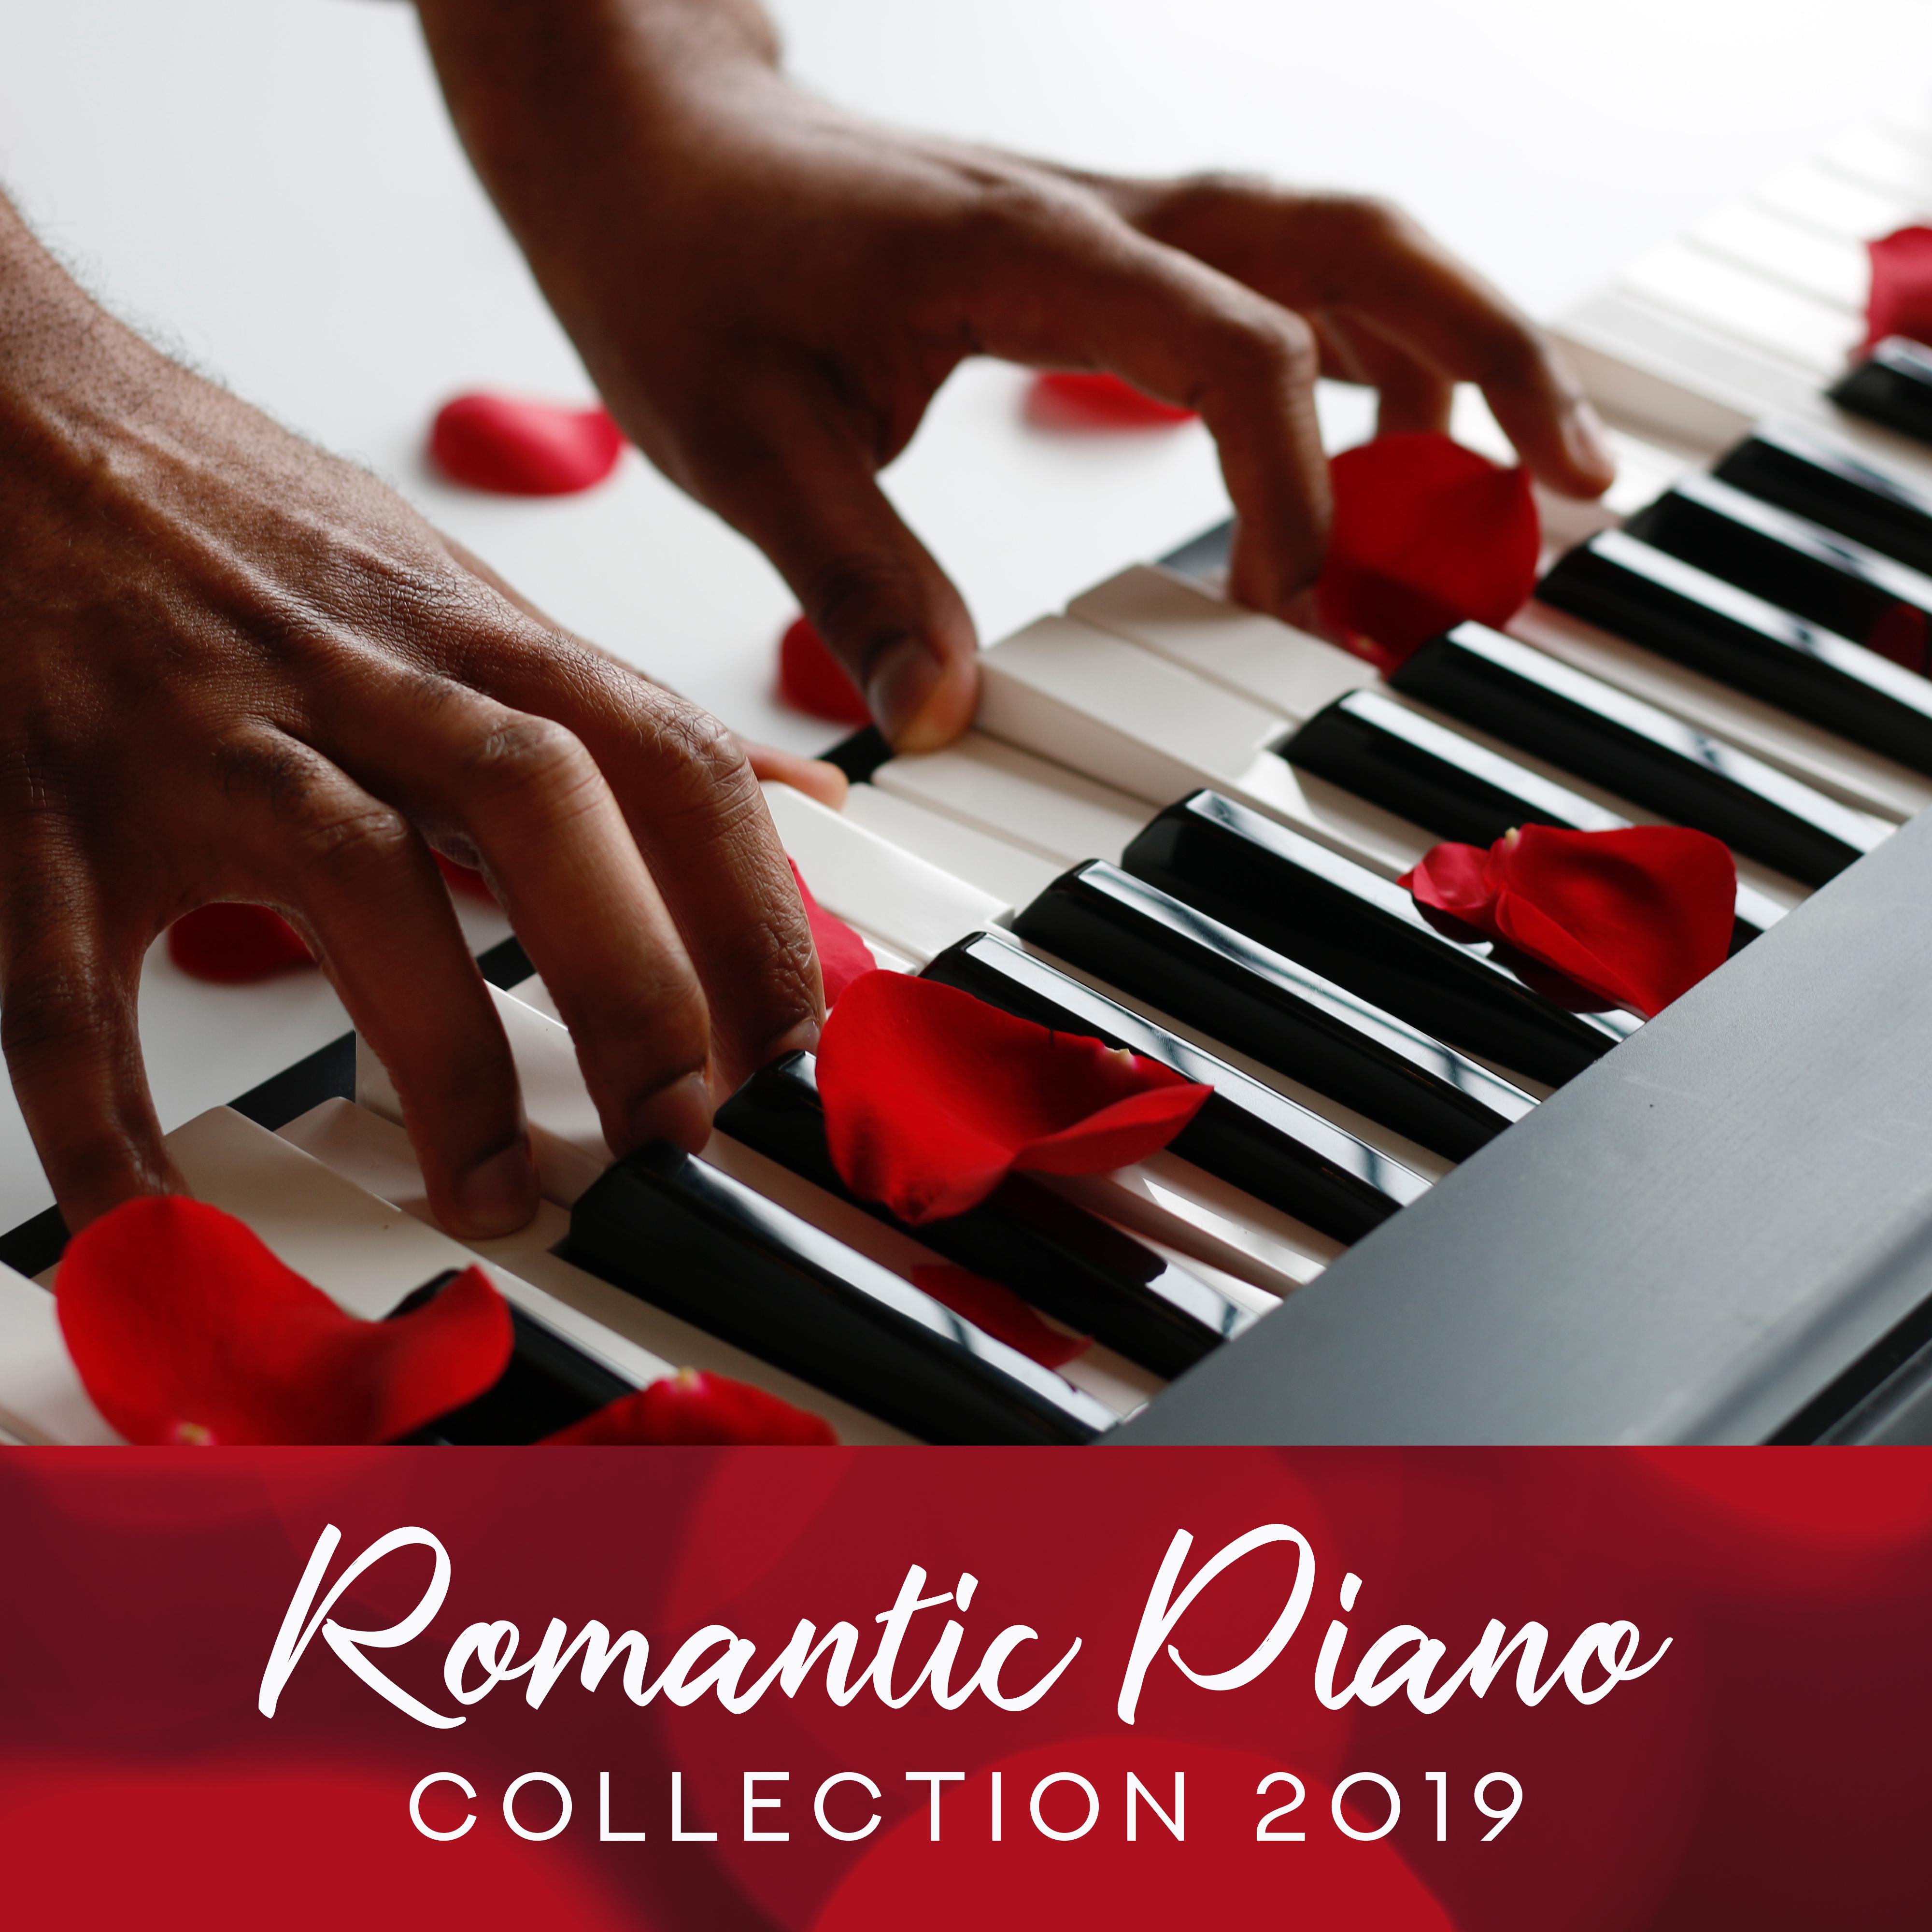 Romantic Piano Collection 2019: Soft Music for Lovers, Beautiful Piano Songs, Instrumental Jazz Music Ambient